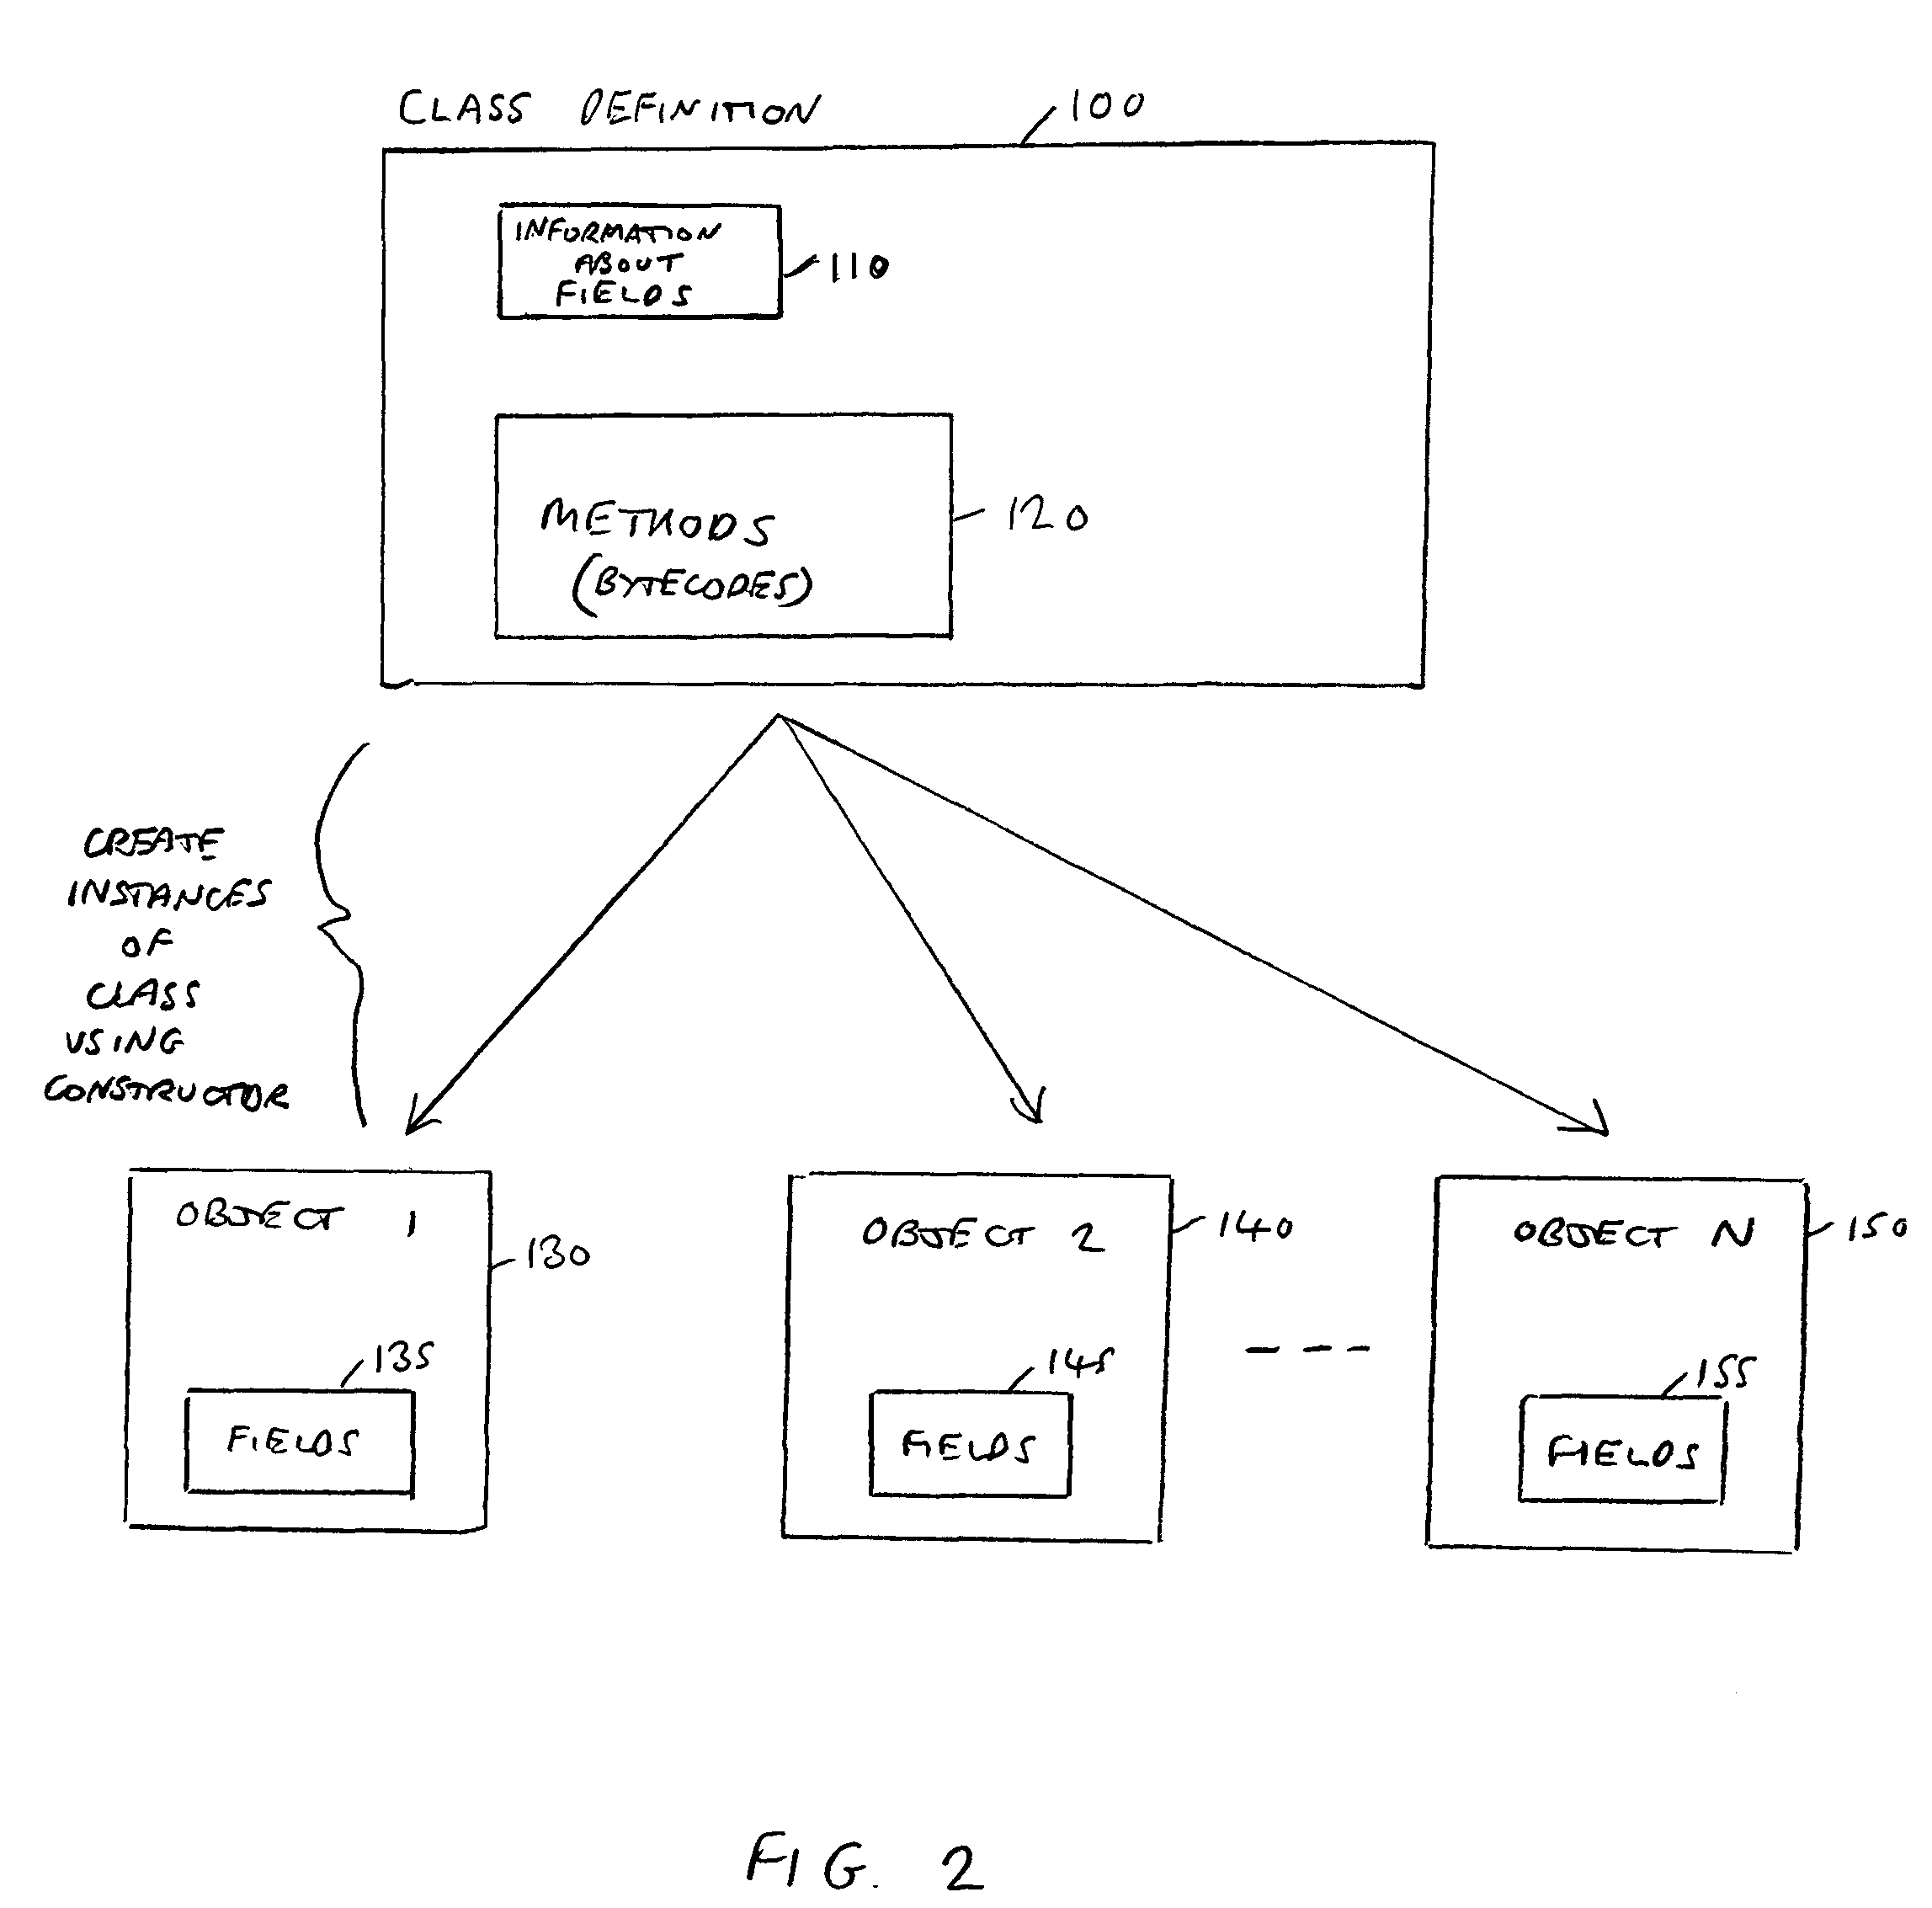 Data processing apparatus, method and computer program product for reducing memory usage of an object oriented program